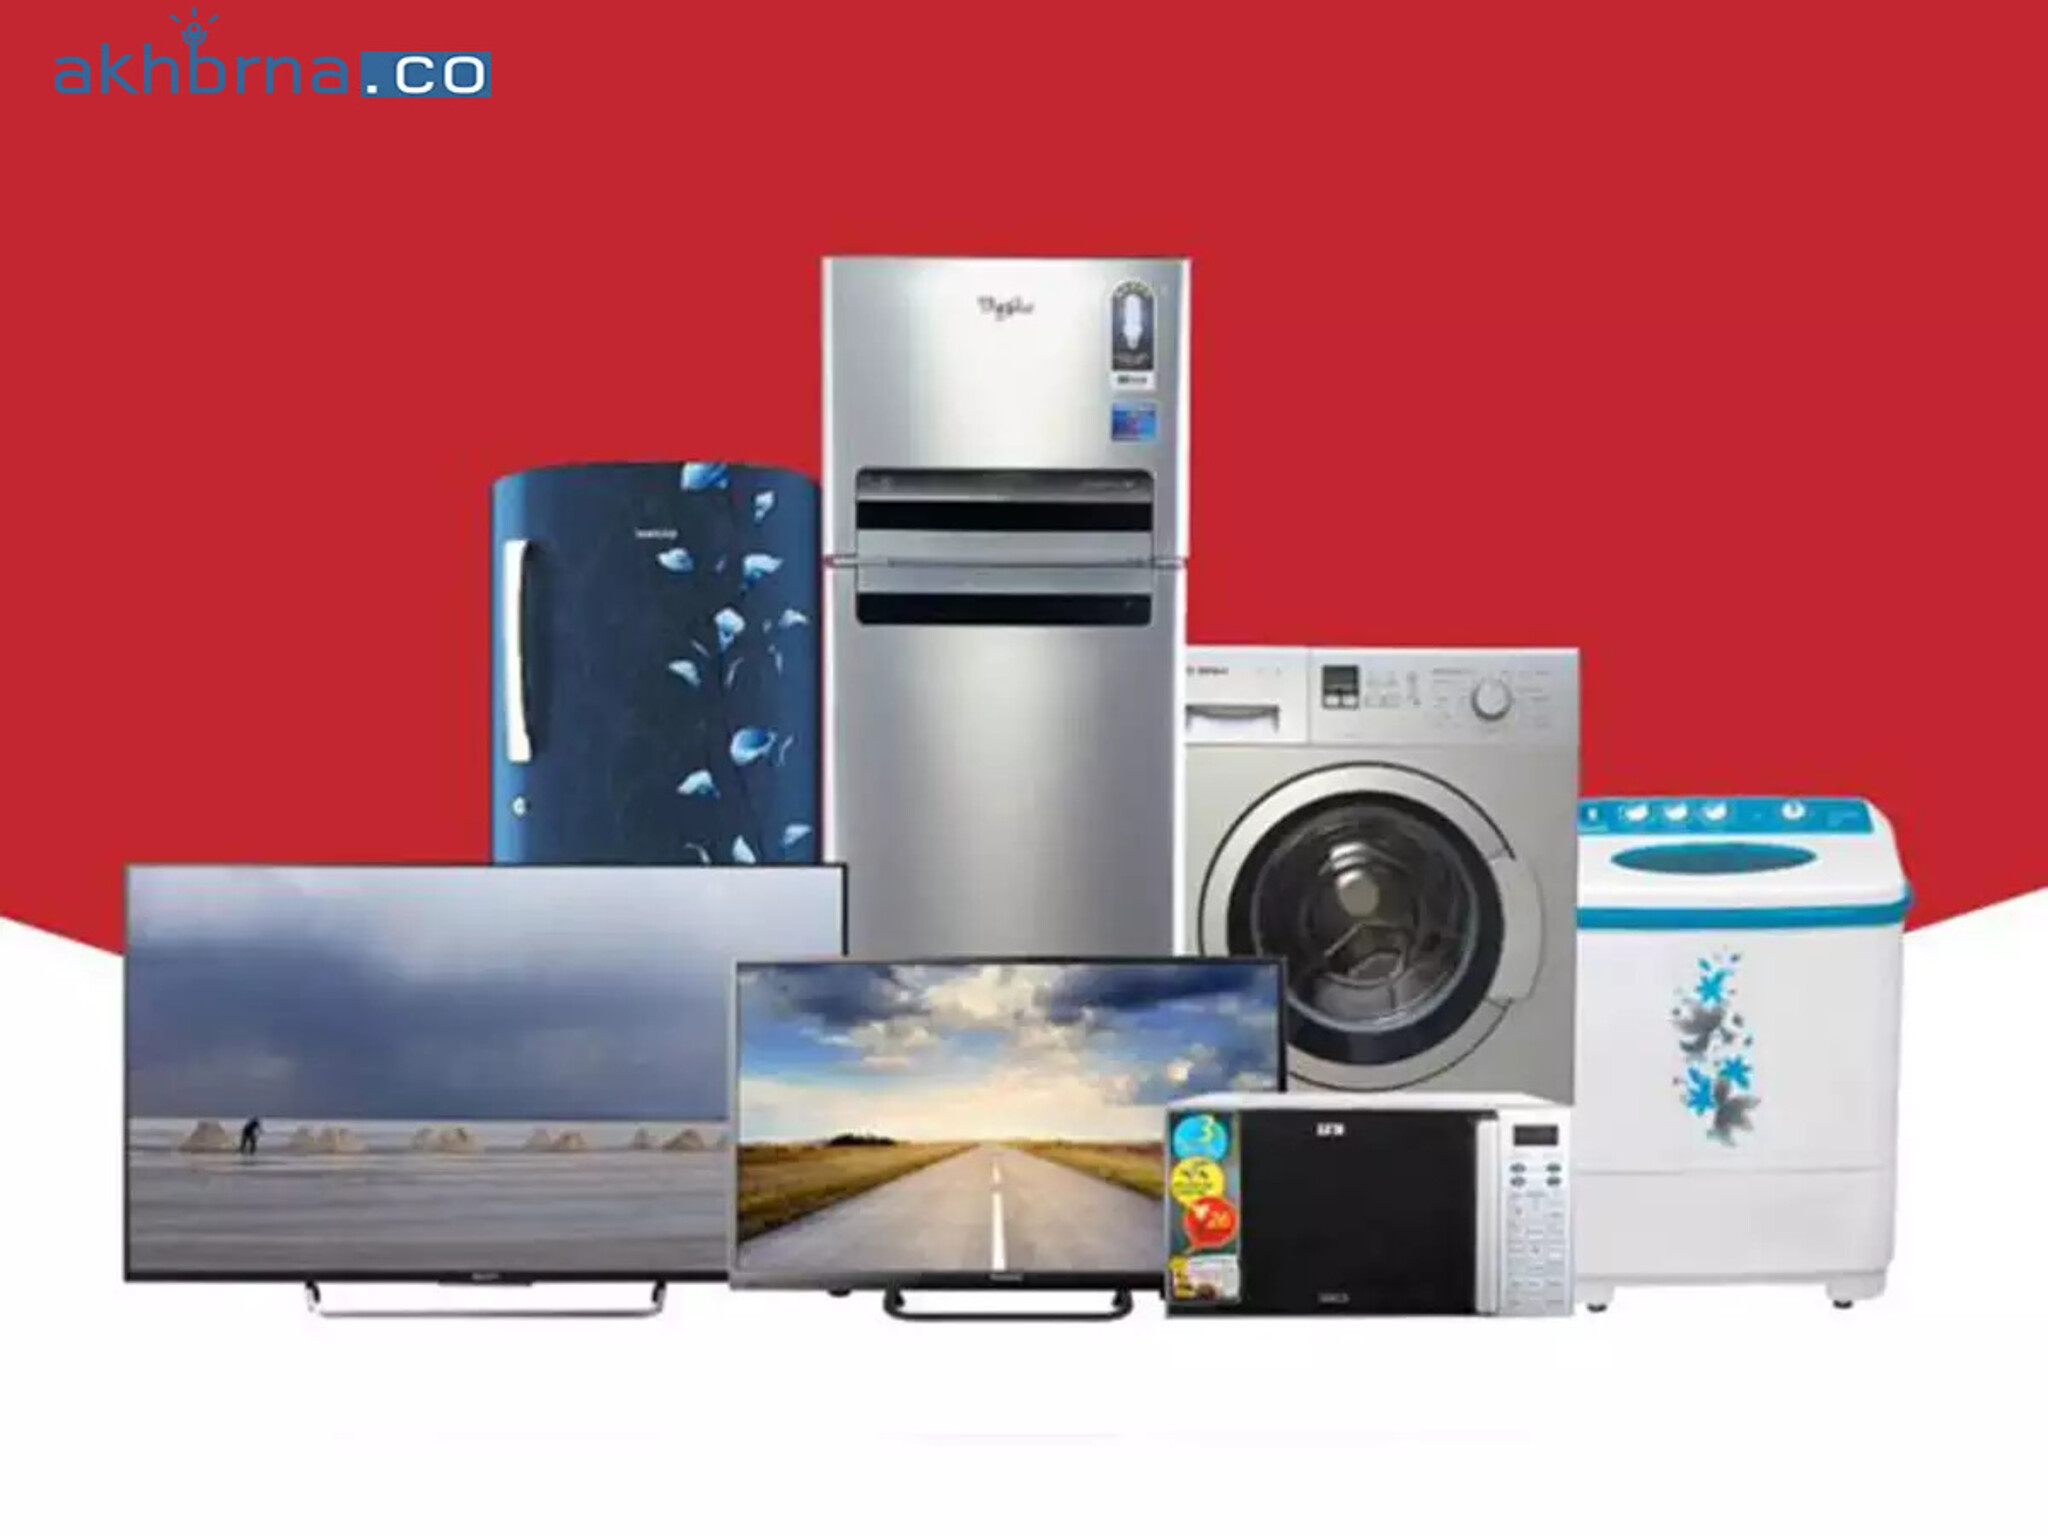 UAE launches "Grand Electronic Sale" for three days